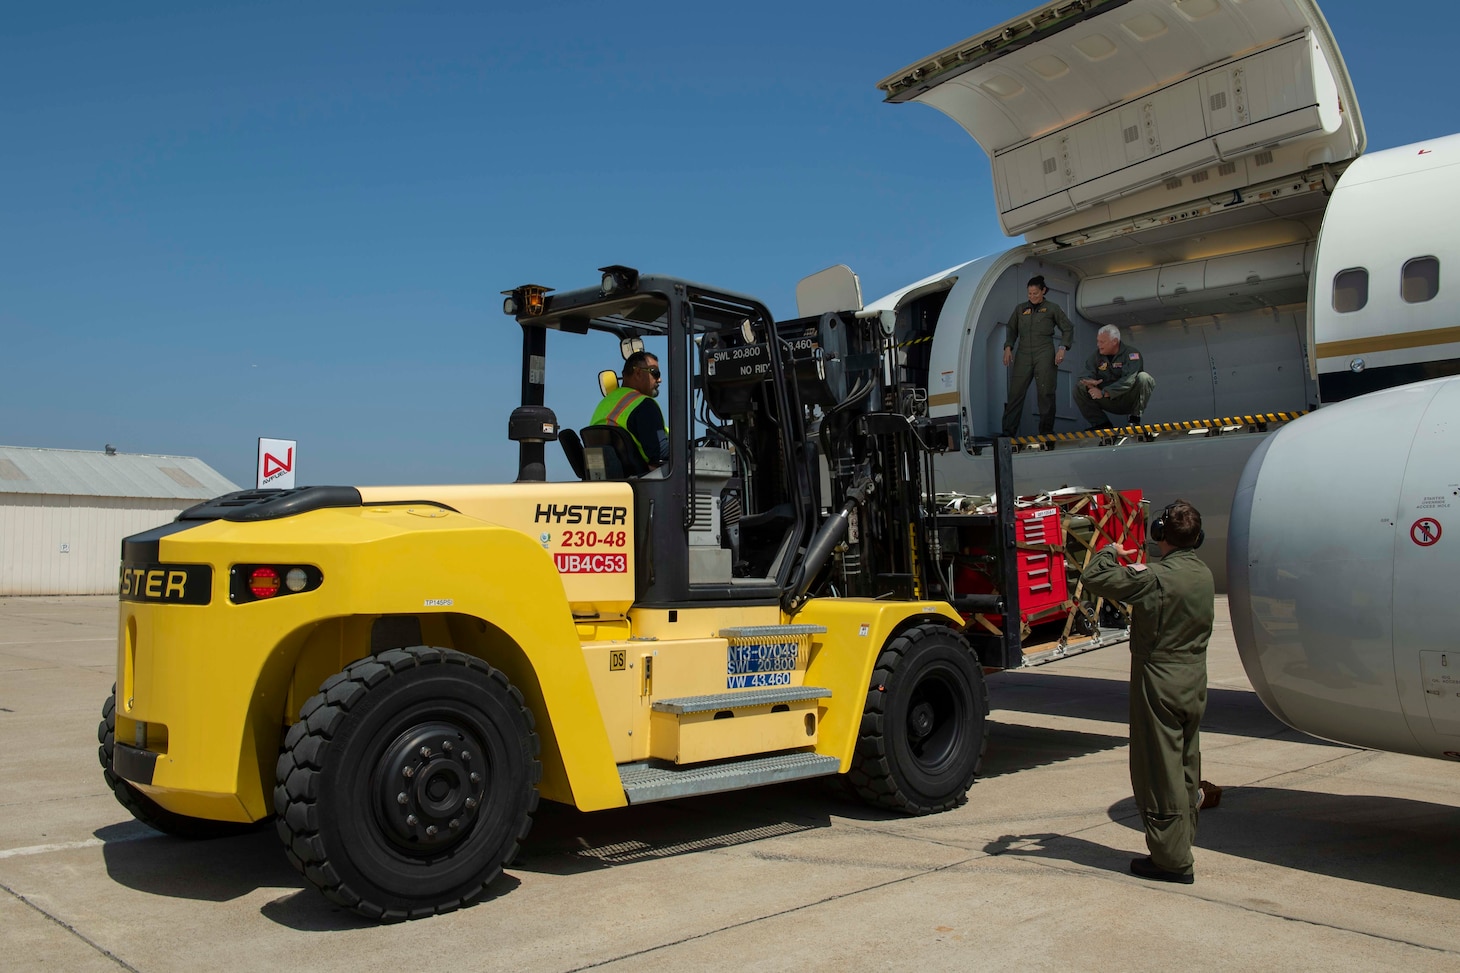 SAN DIEGO (Aug. 7, 2021) Sailors assigned to Fleet Logistics Support Squadron (VR) 57 Naval Facilities Engineering Systems Command personnel load Fleet Logistics Multi-Mission Squadron (VRM) 30 cargo onto VR-57's C-40 Clipper at Brown Field Municipal Airport. The VRM-30 detachment is currently deployed with Carrier Strike Group (CSG) 1 as the first CMV-22 Osprey detachment embarked for a CSG deployment. (U.S. Navy photo by Mass Communication Specialist 1st Class Chelsea Milburn)